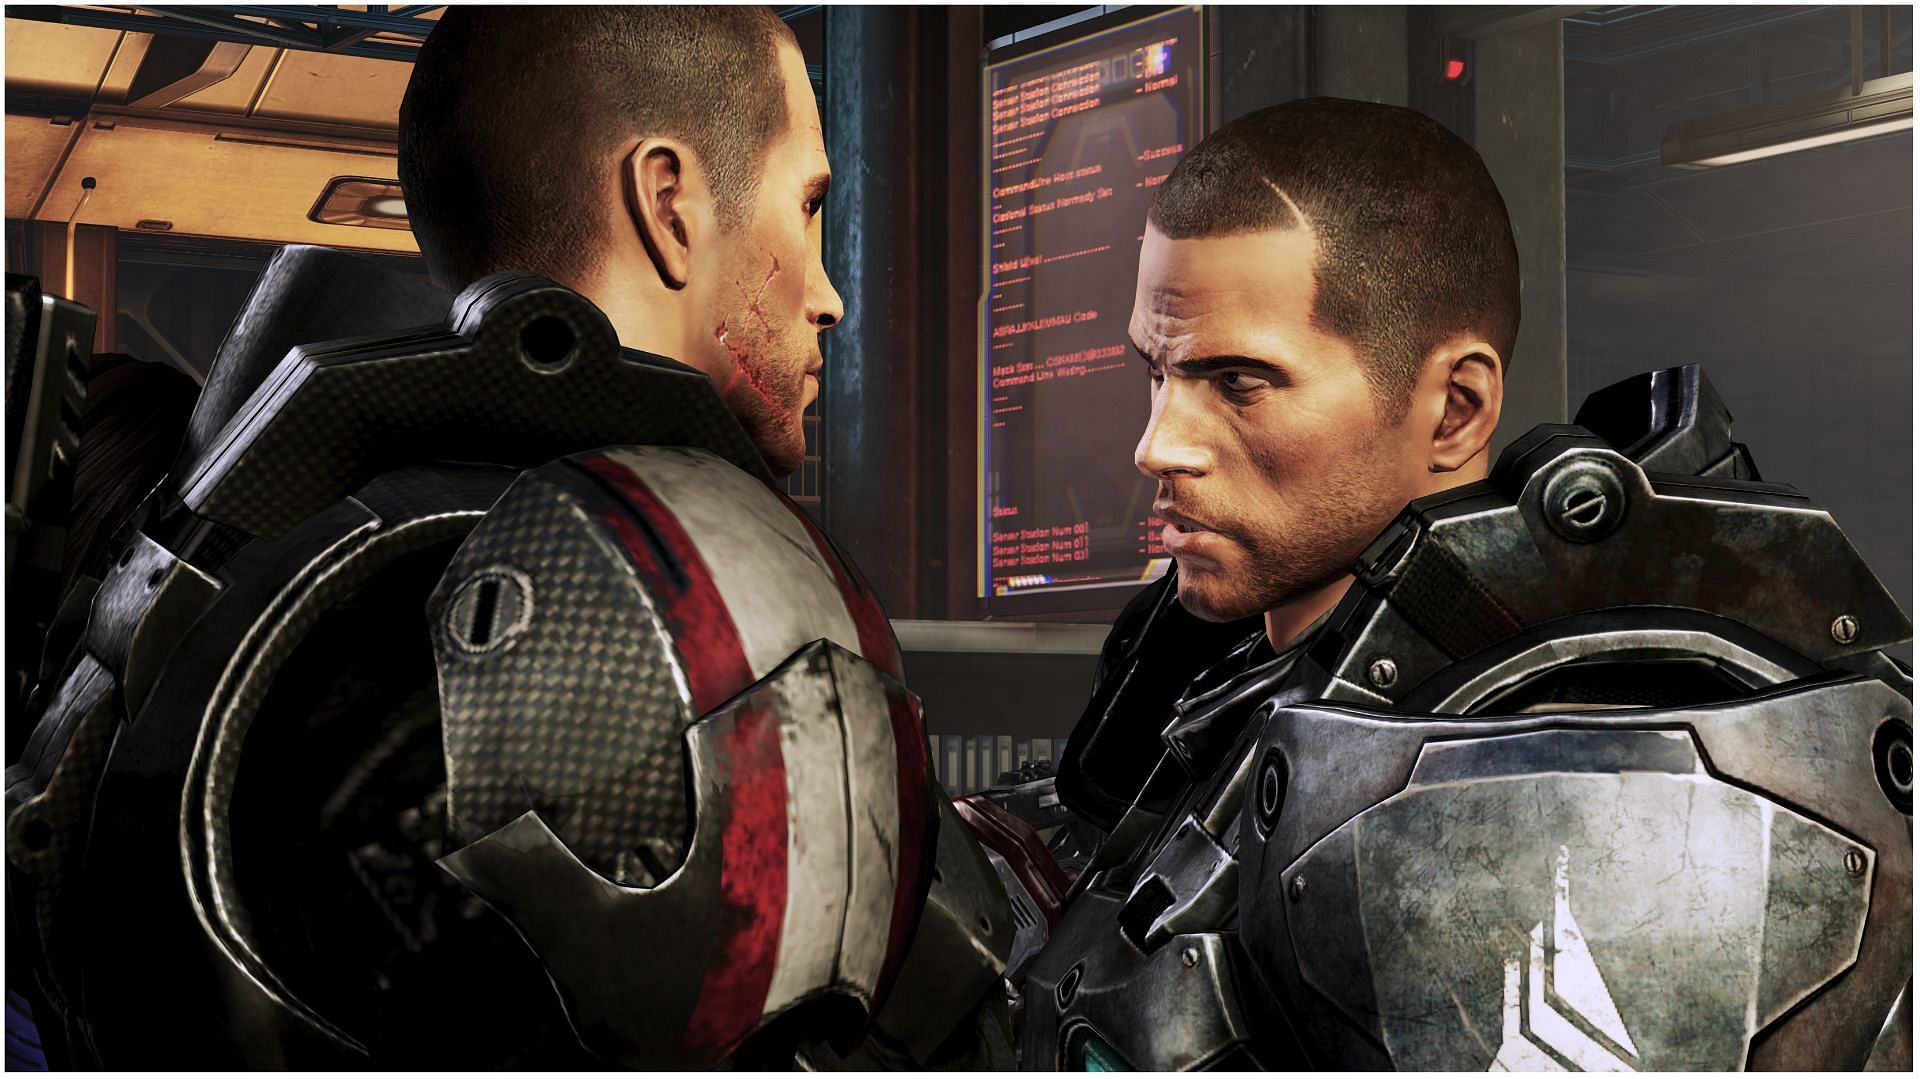 Shepard faces his clone in the third Mass Effect video game (Image via BioWare)